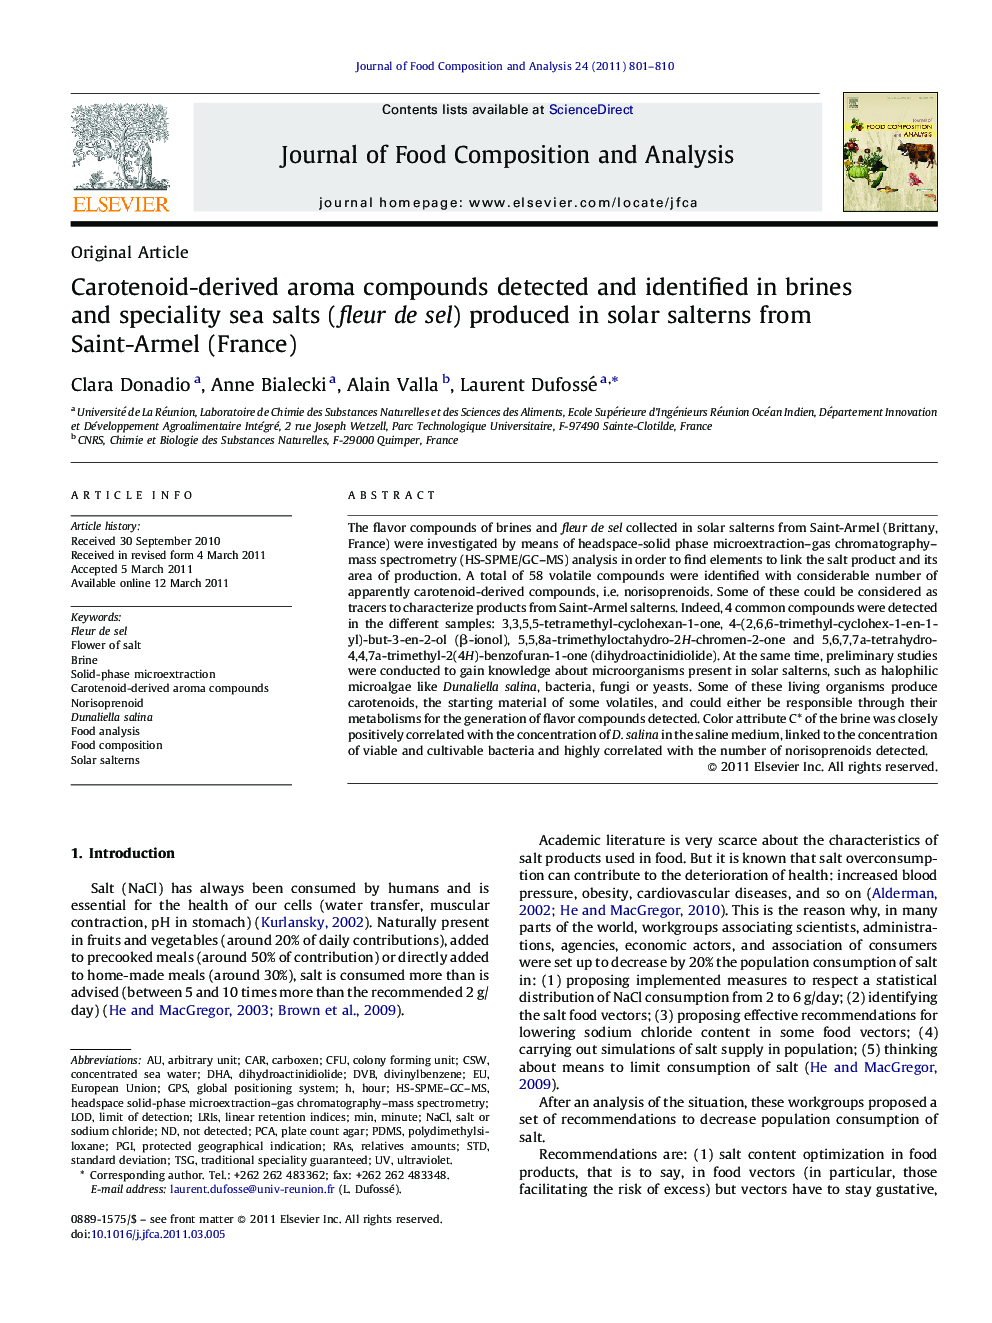 Carotenoid-derived aroma compounds detected and identified in brines and speciality sea salts (fleur de sel) produced in solar salterns from Saint-Armel (France)